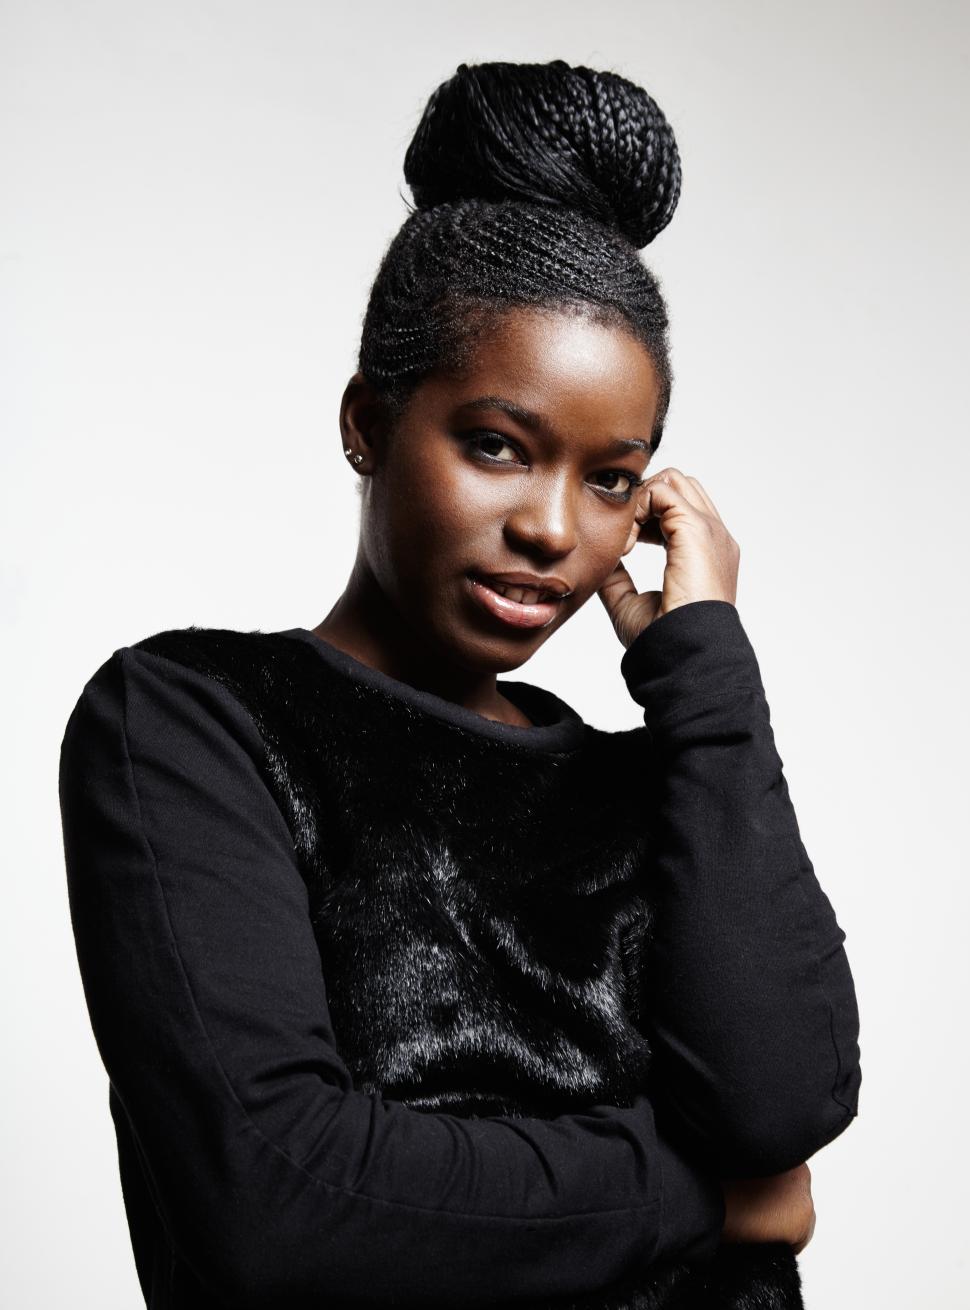 Free Image of black woman with a bun of braided hair 